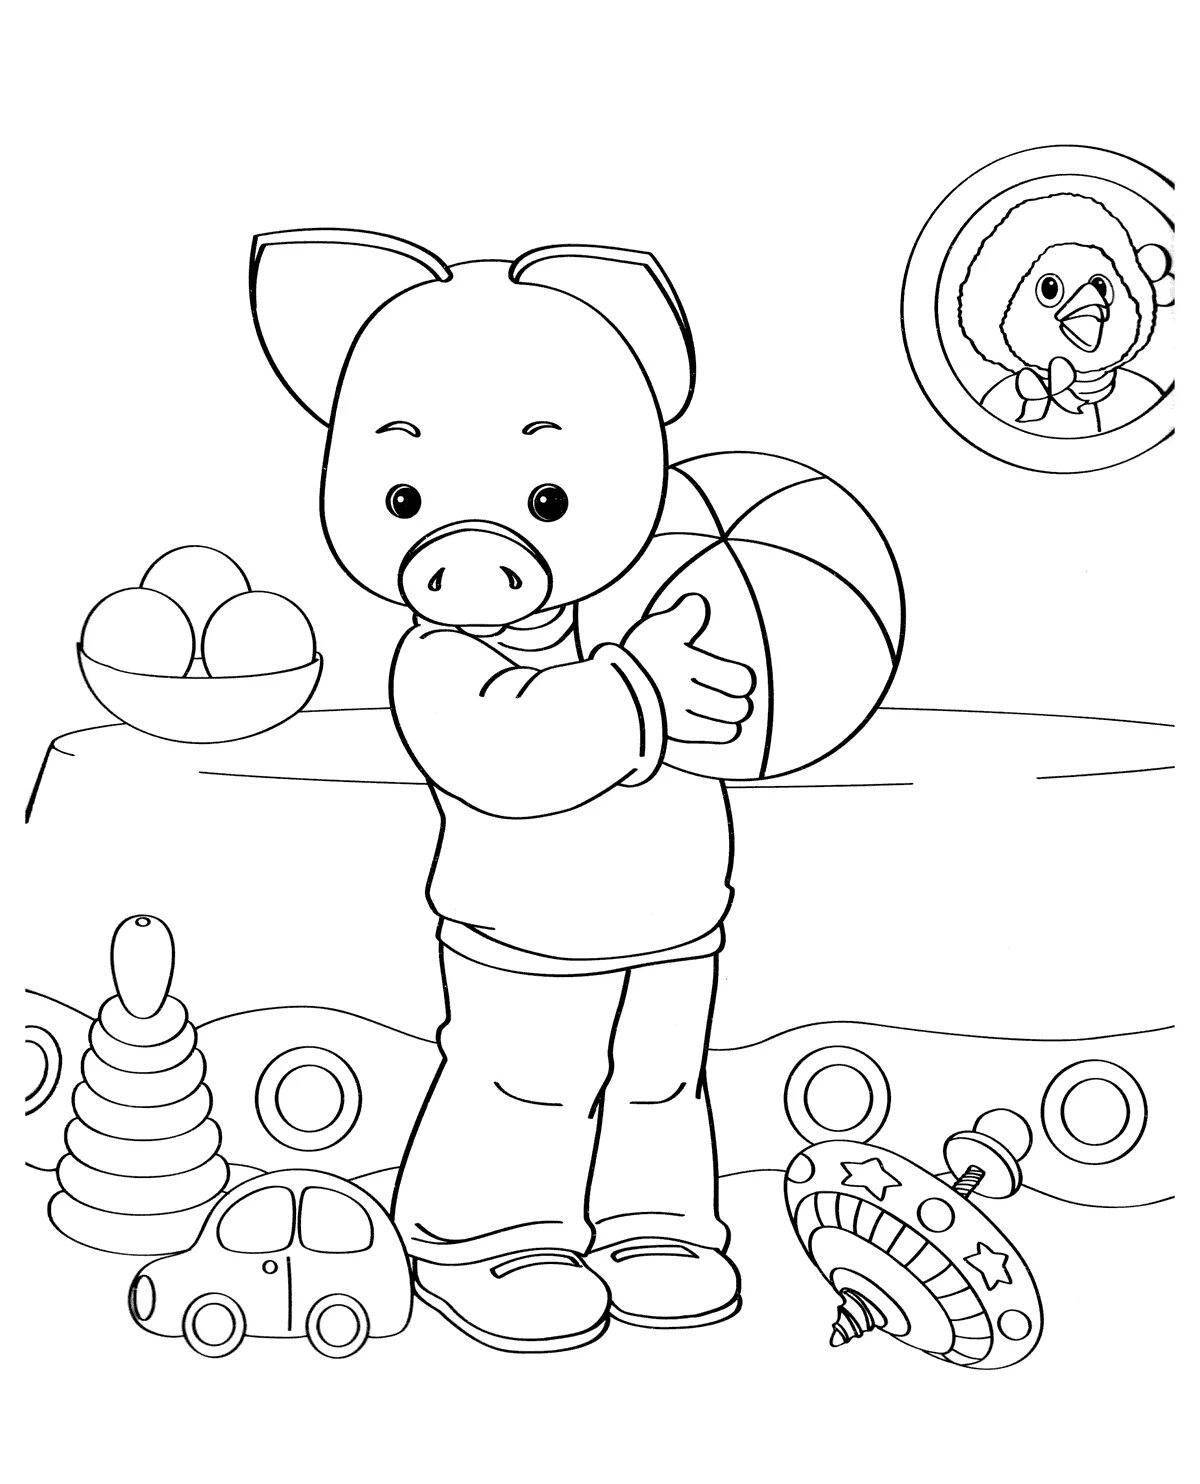 Coloring page graceful pig and stepashka